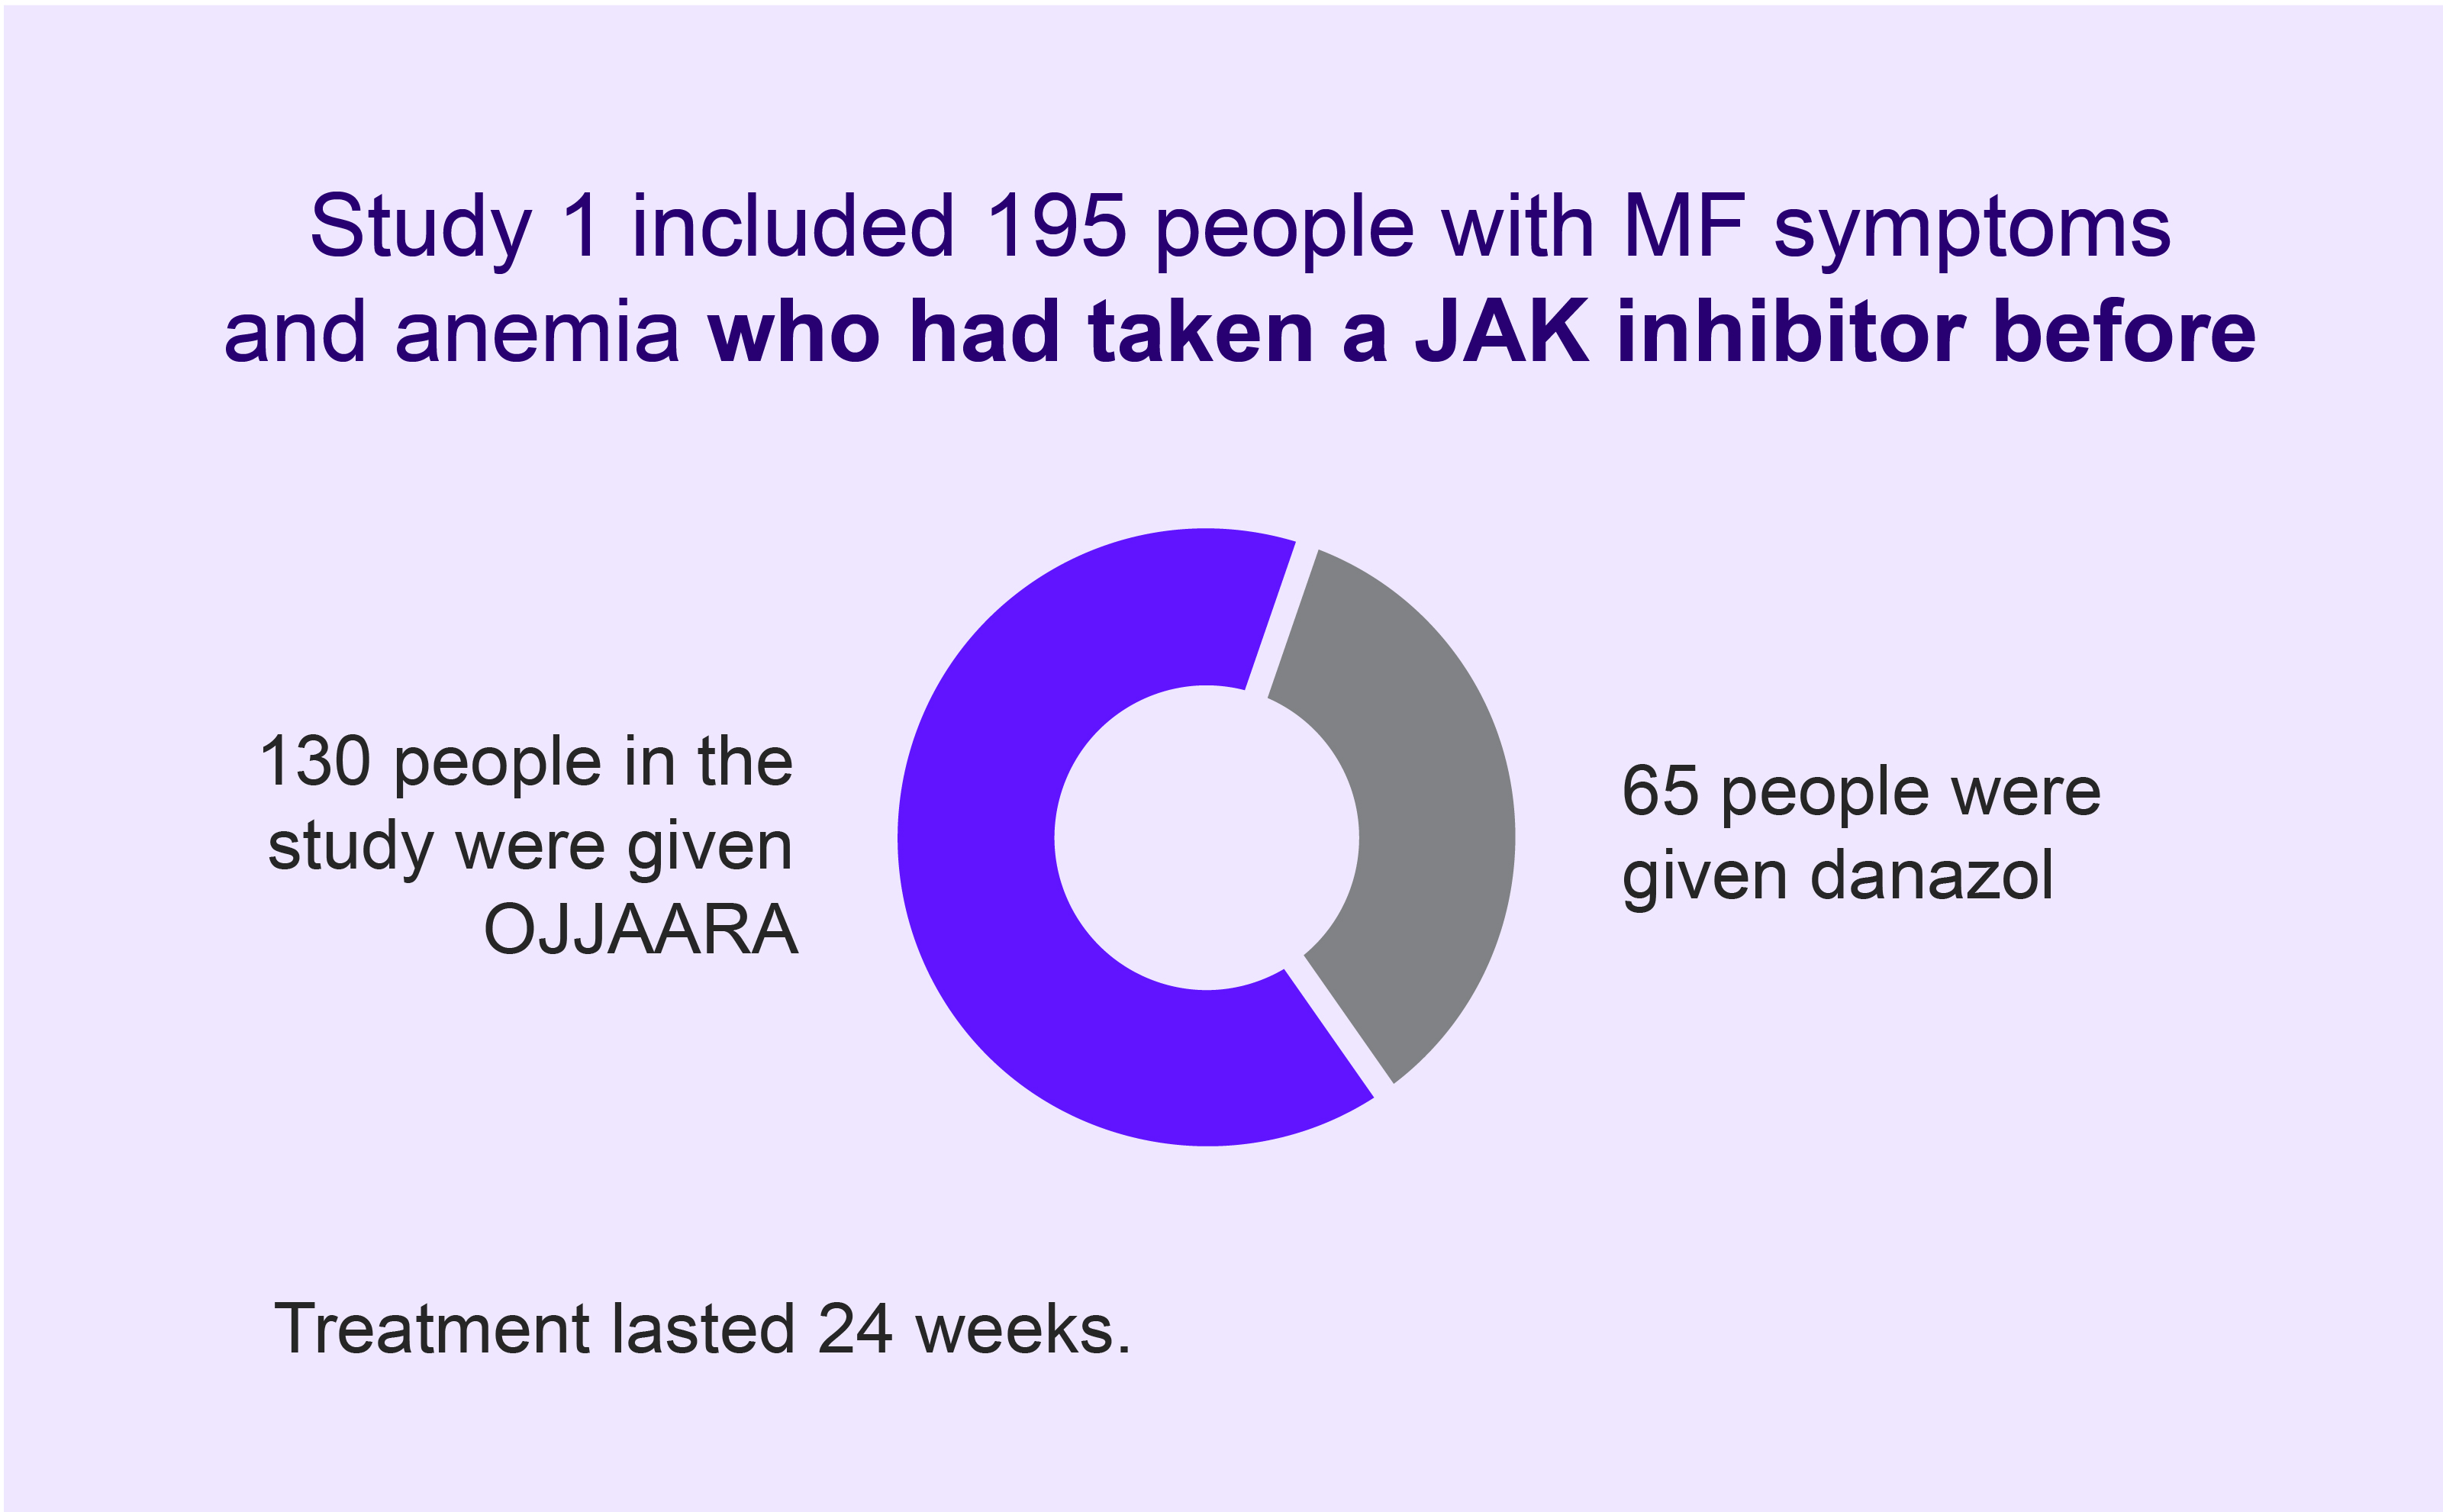 Study 1 included 195 people with MF symptoms and anemia who had taken a JAK inhibitor before 